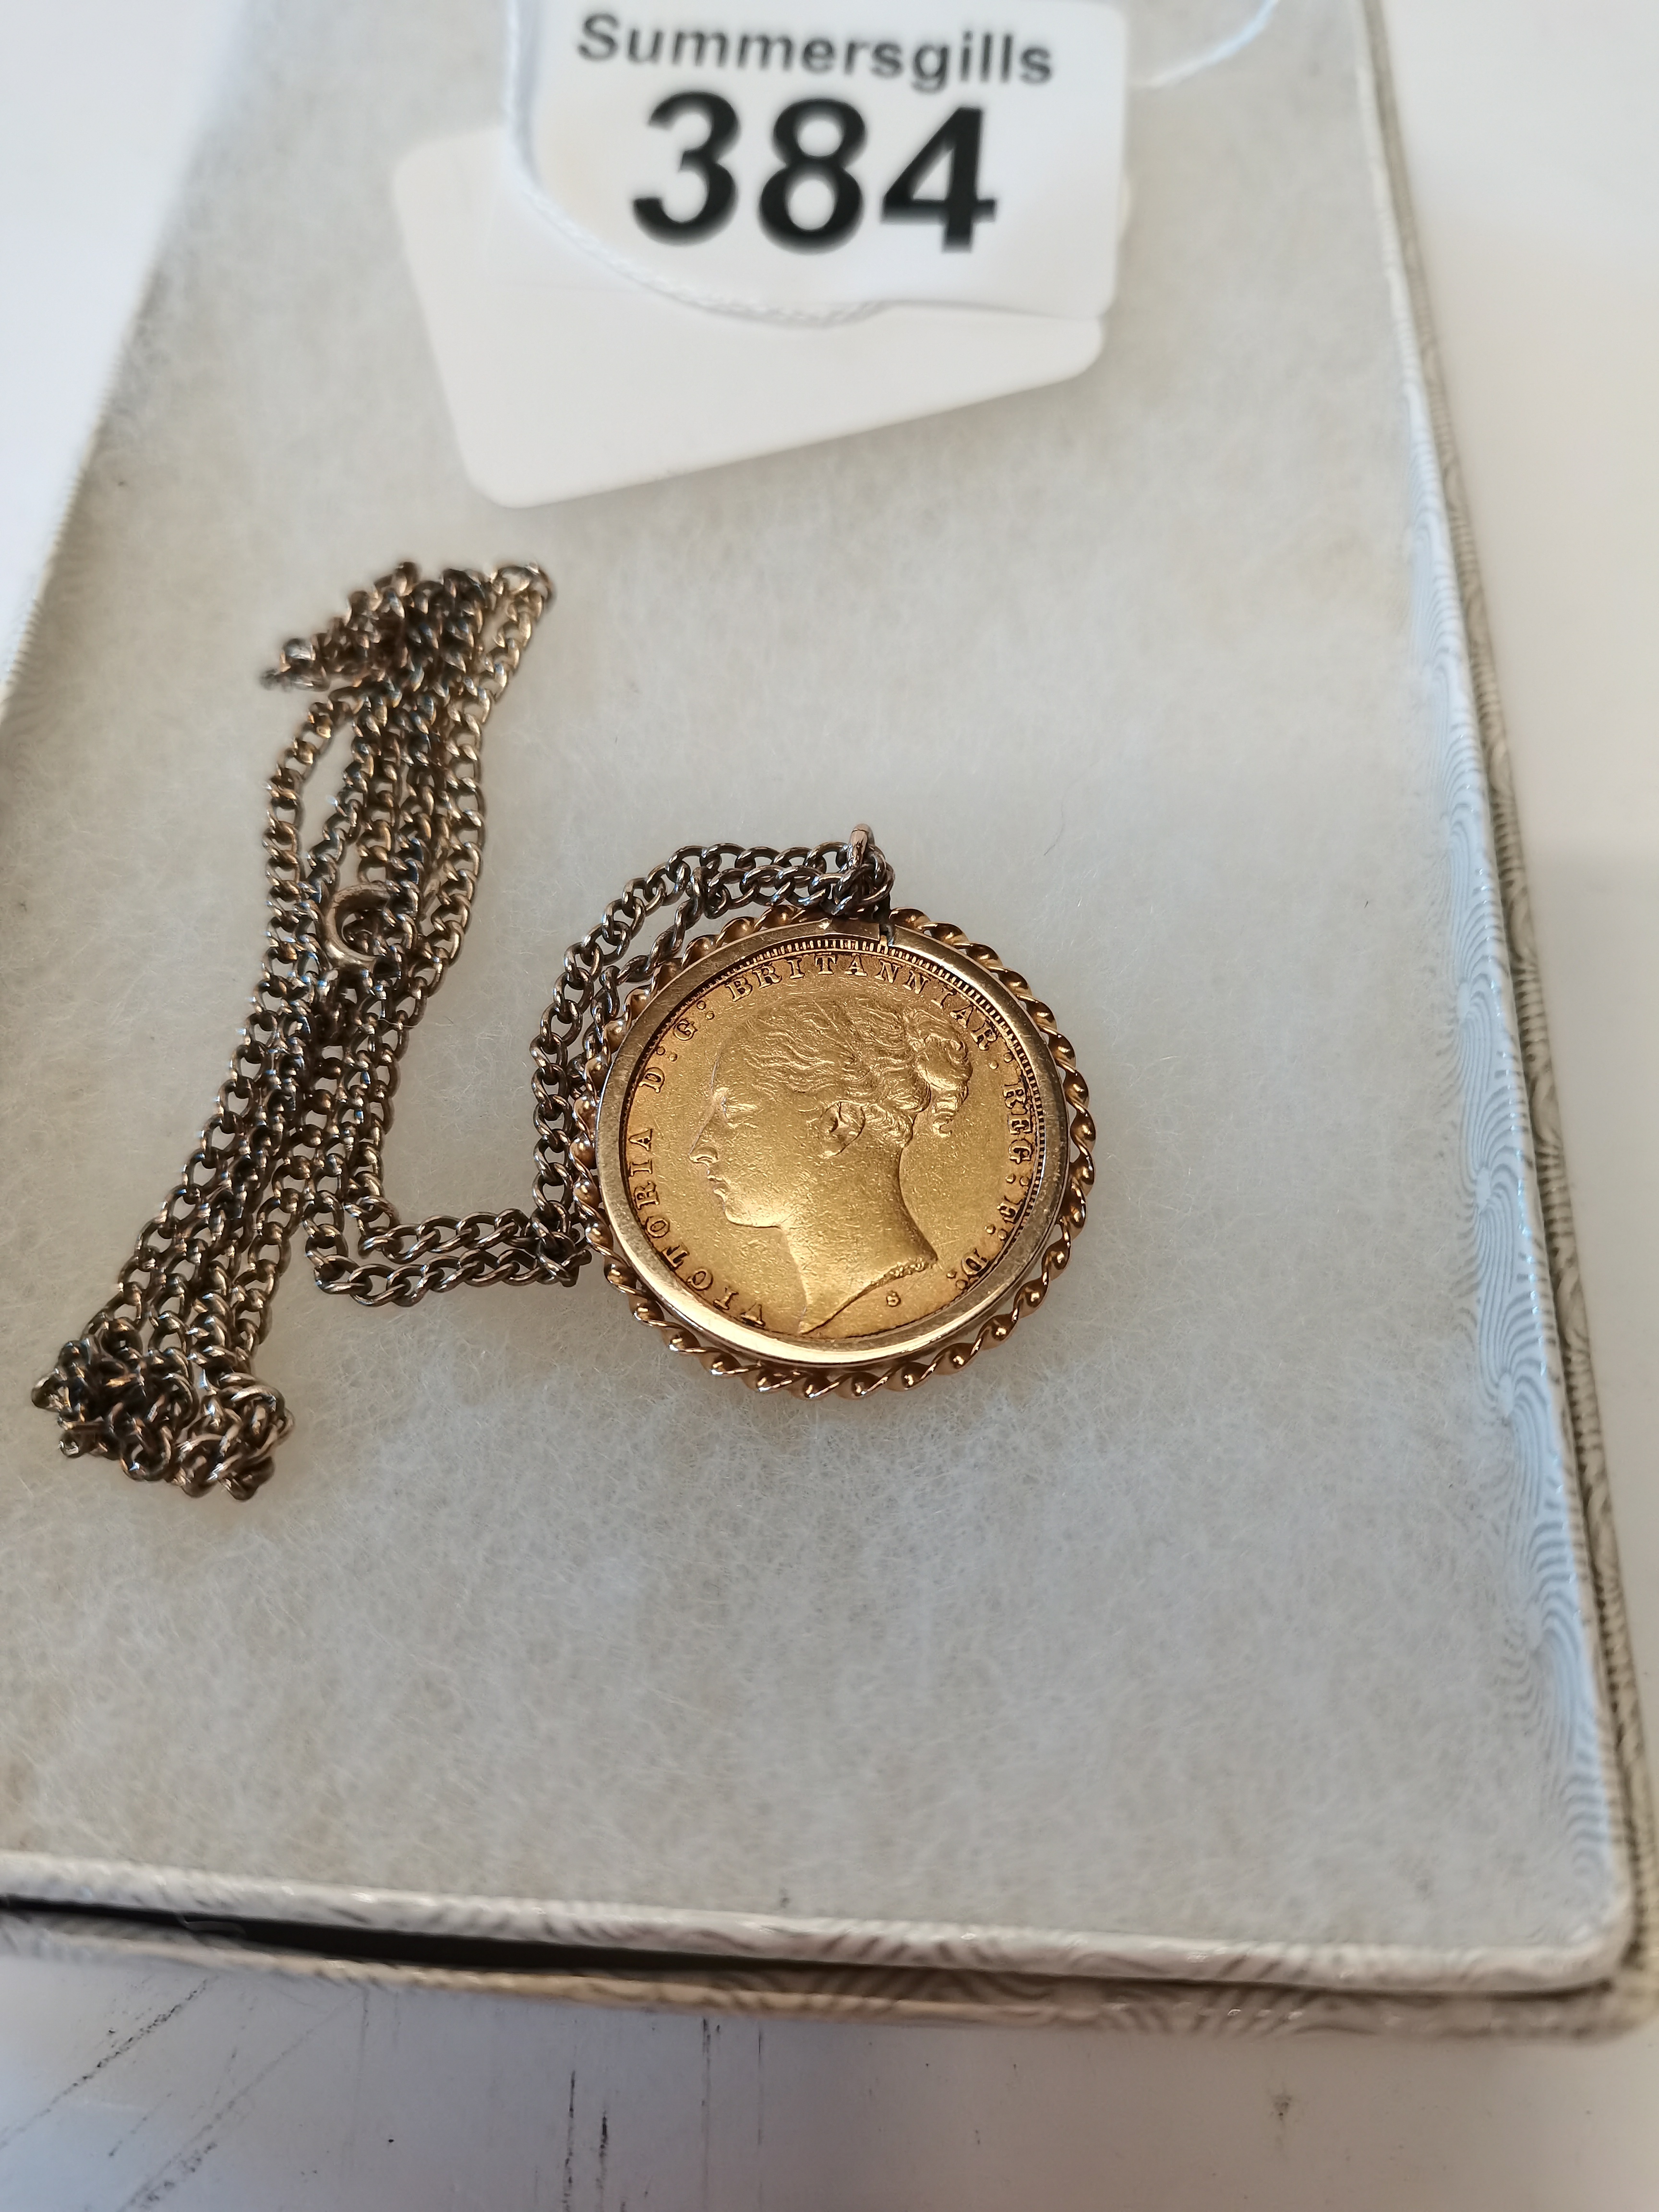 1885 gold sovereign weight 10g on necklace - Image 2 of 2